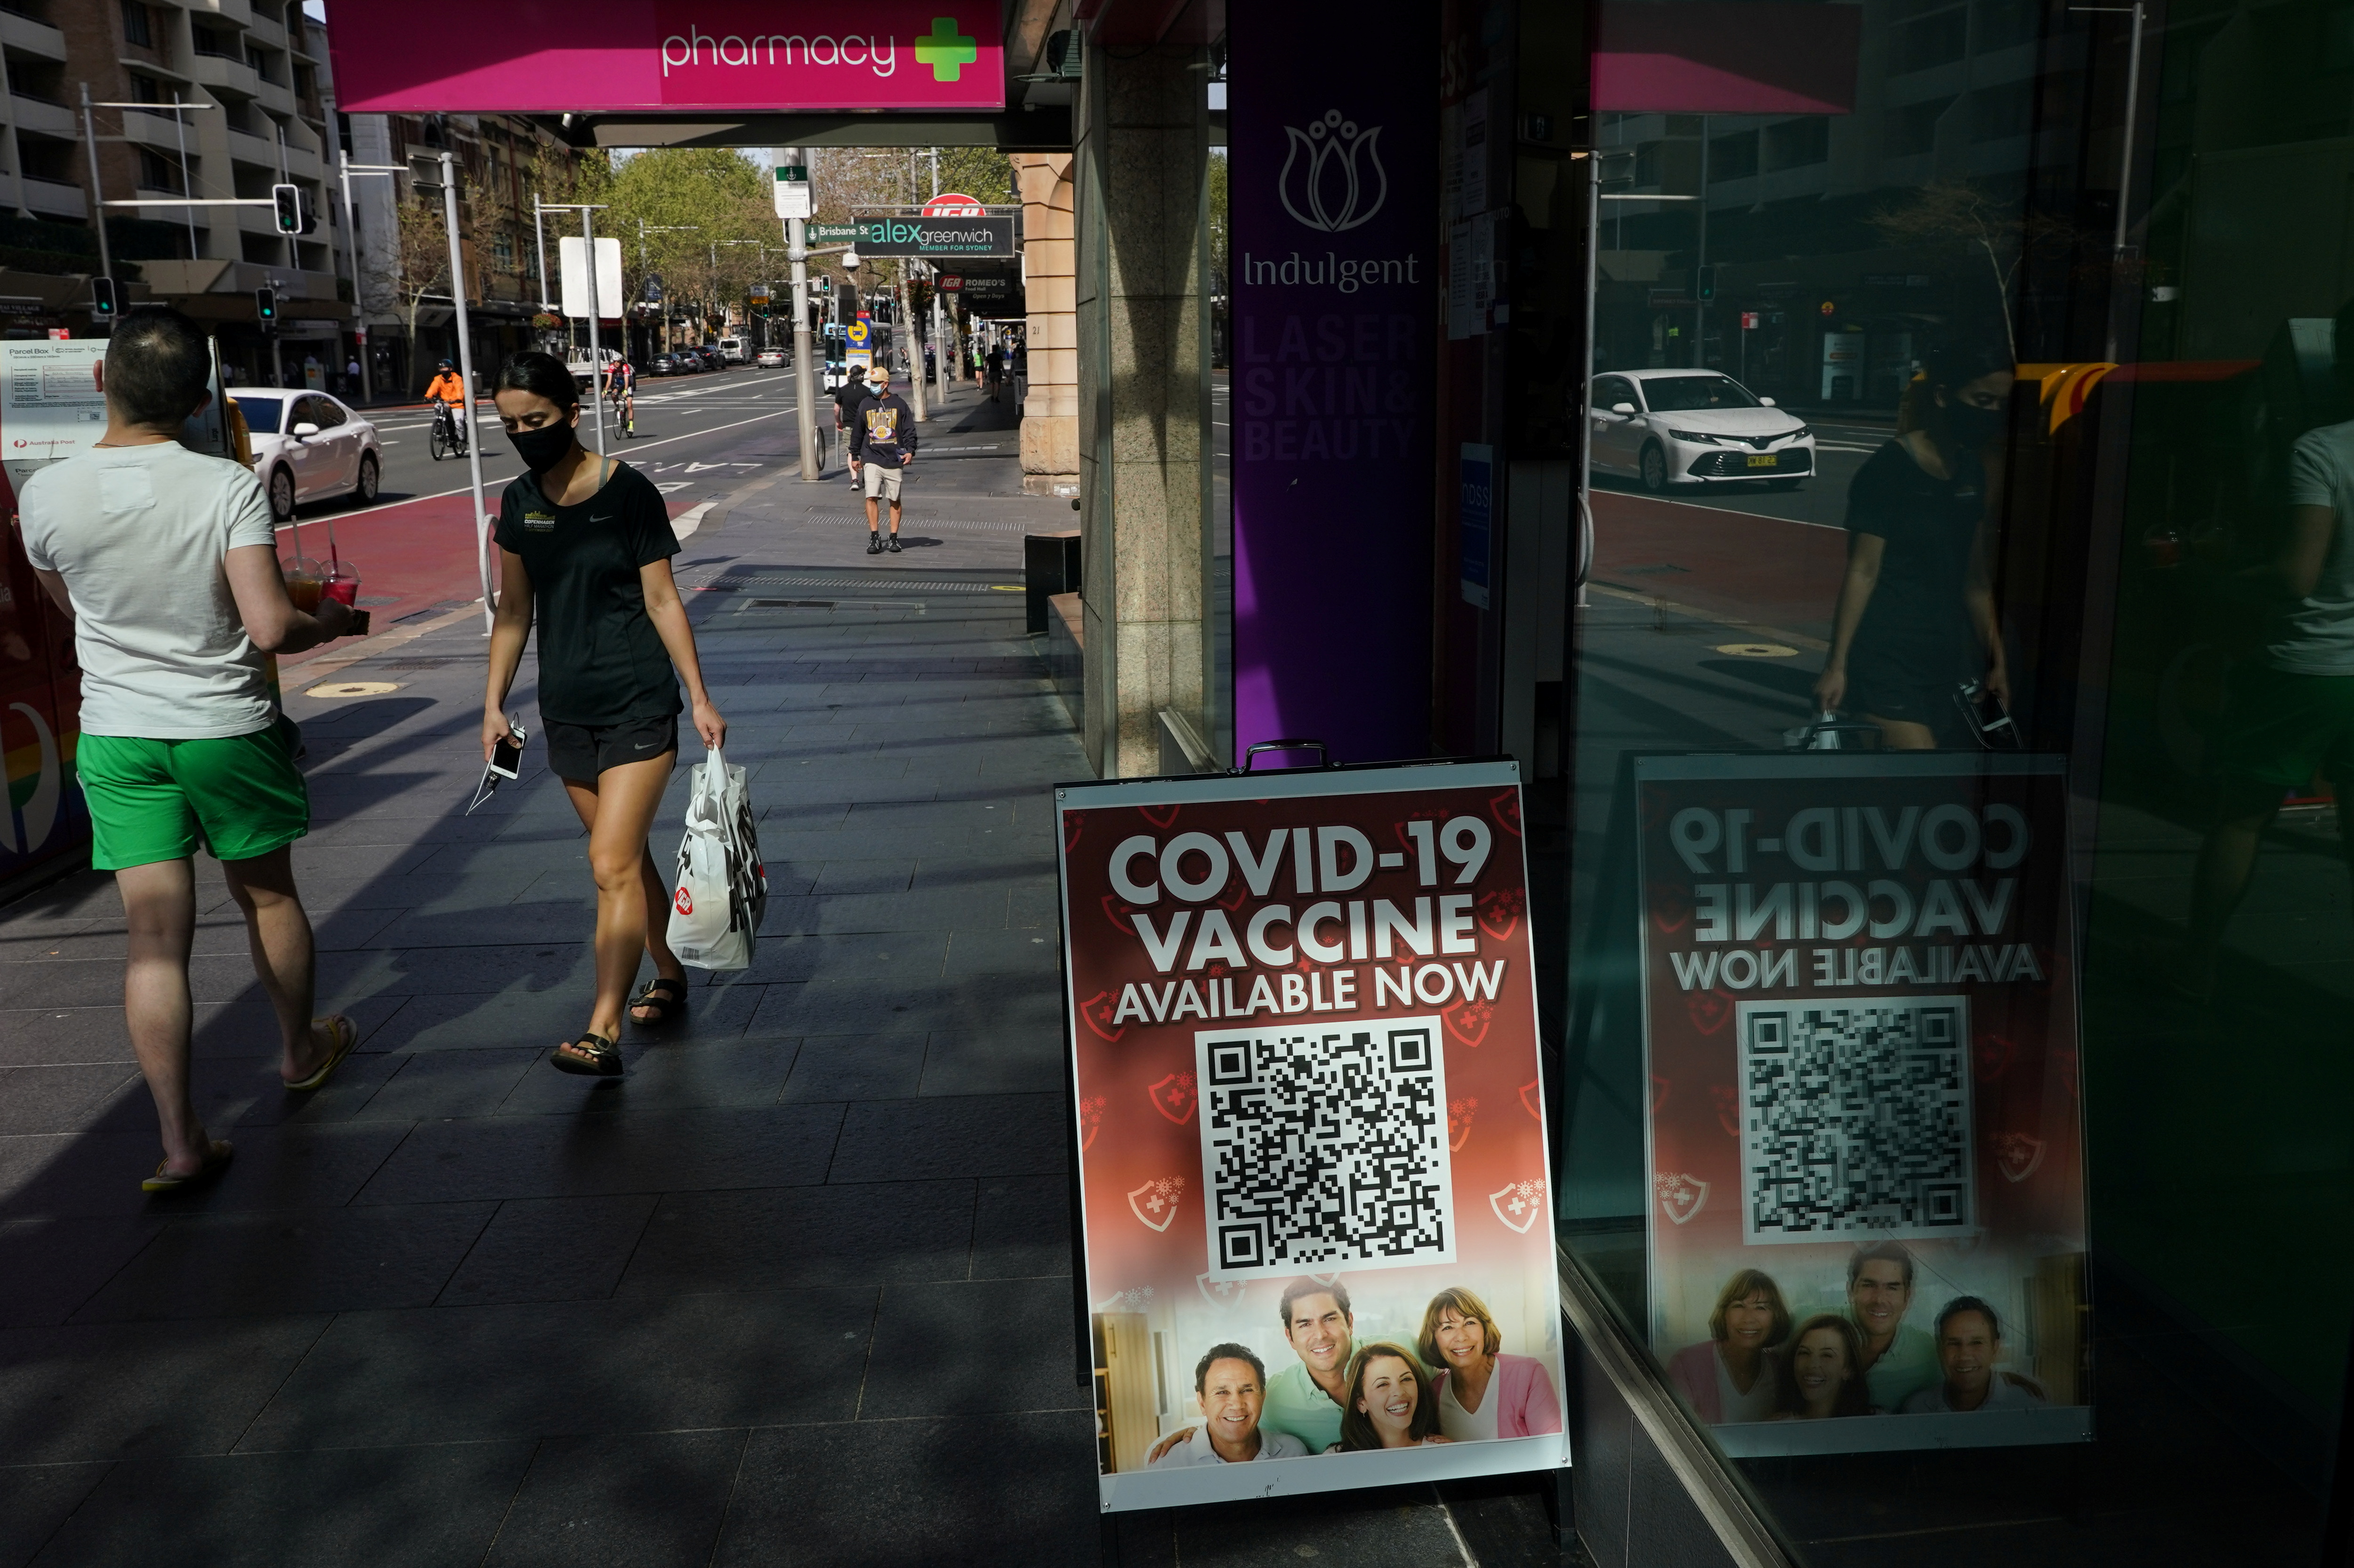 A COVID-19 lockdown remains in place as an outbreak of cases affects Sydney